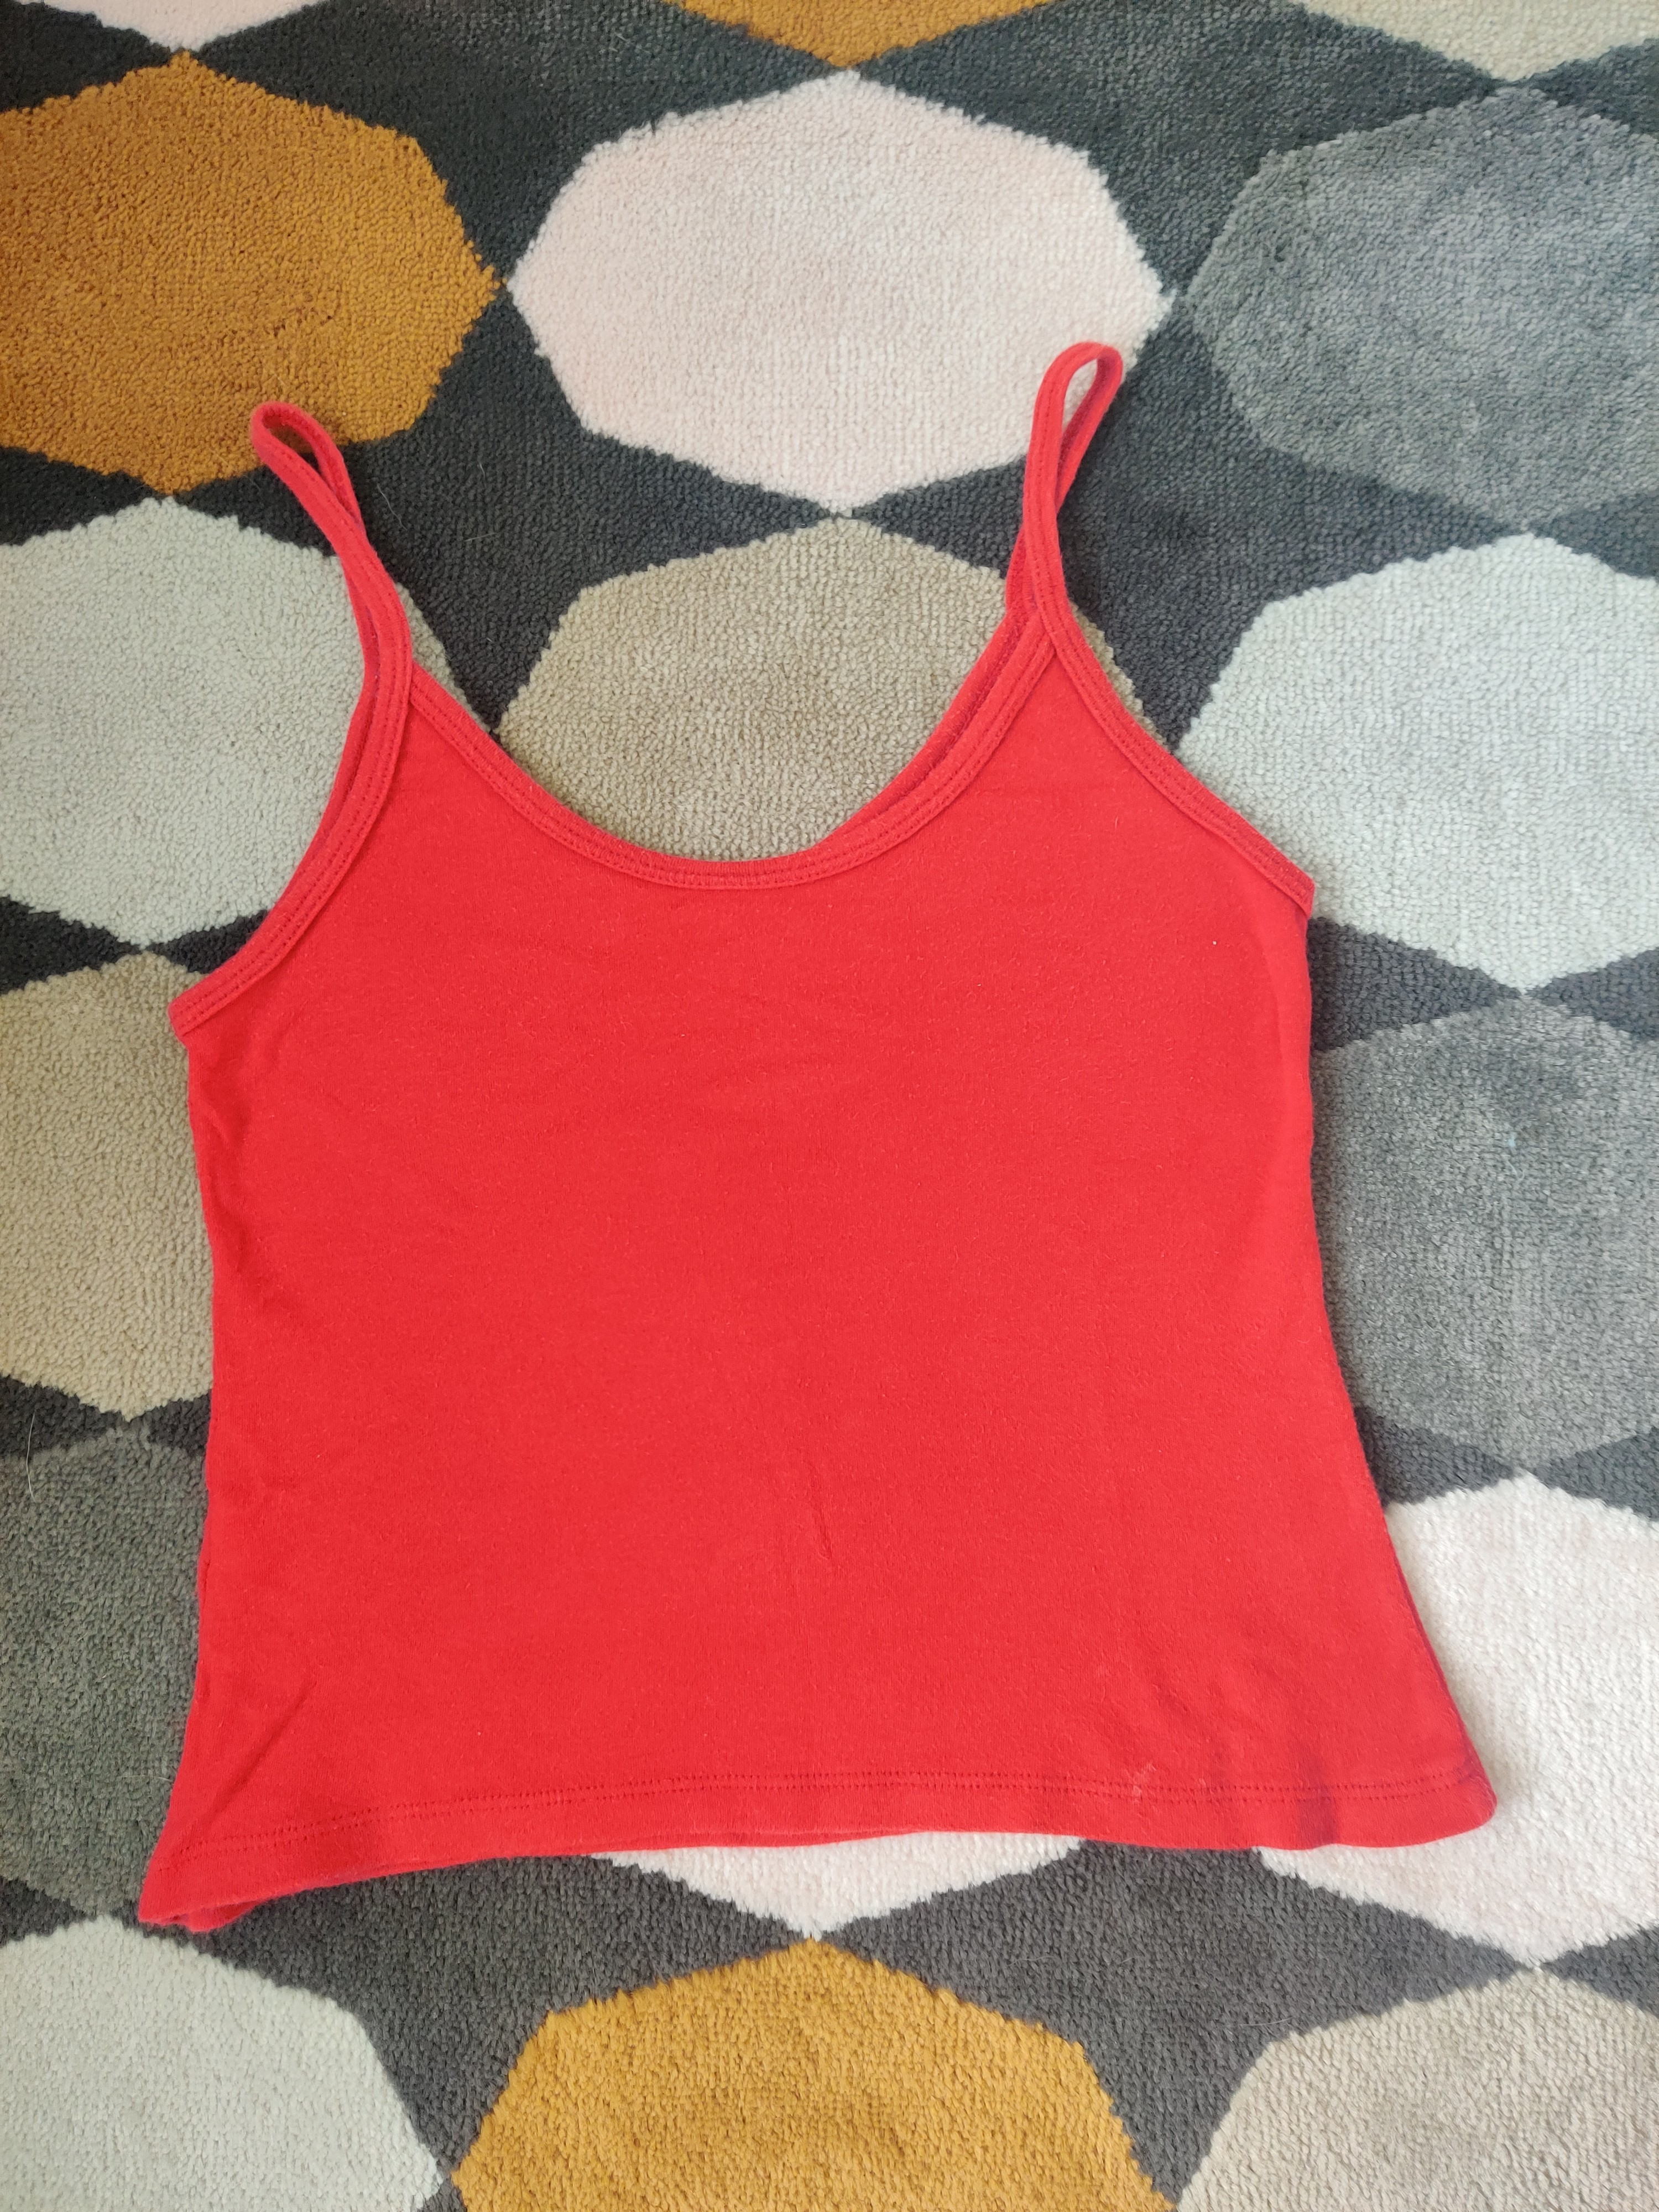 Brandy Melville, red top